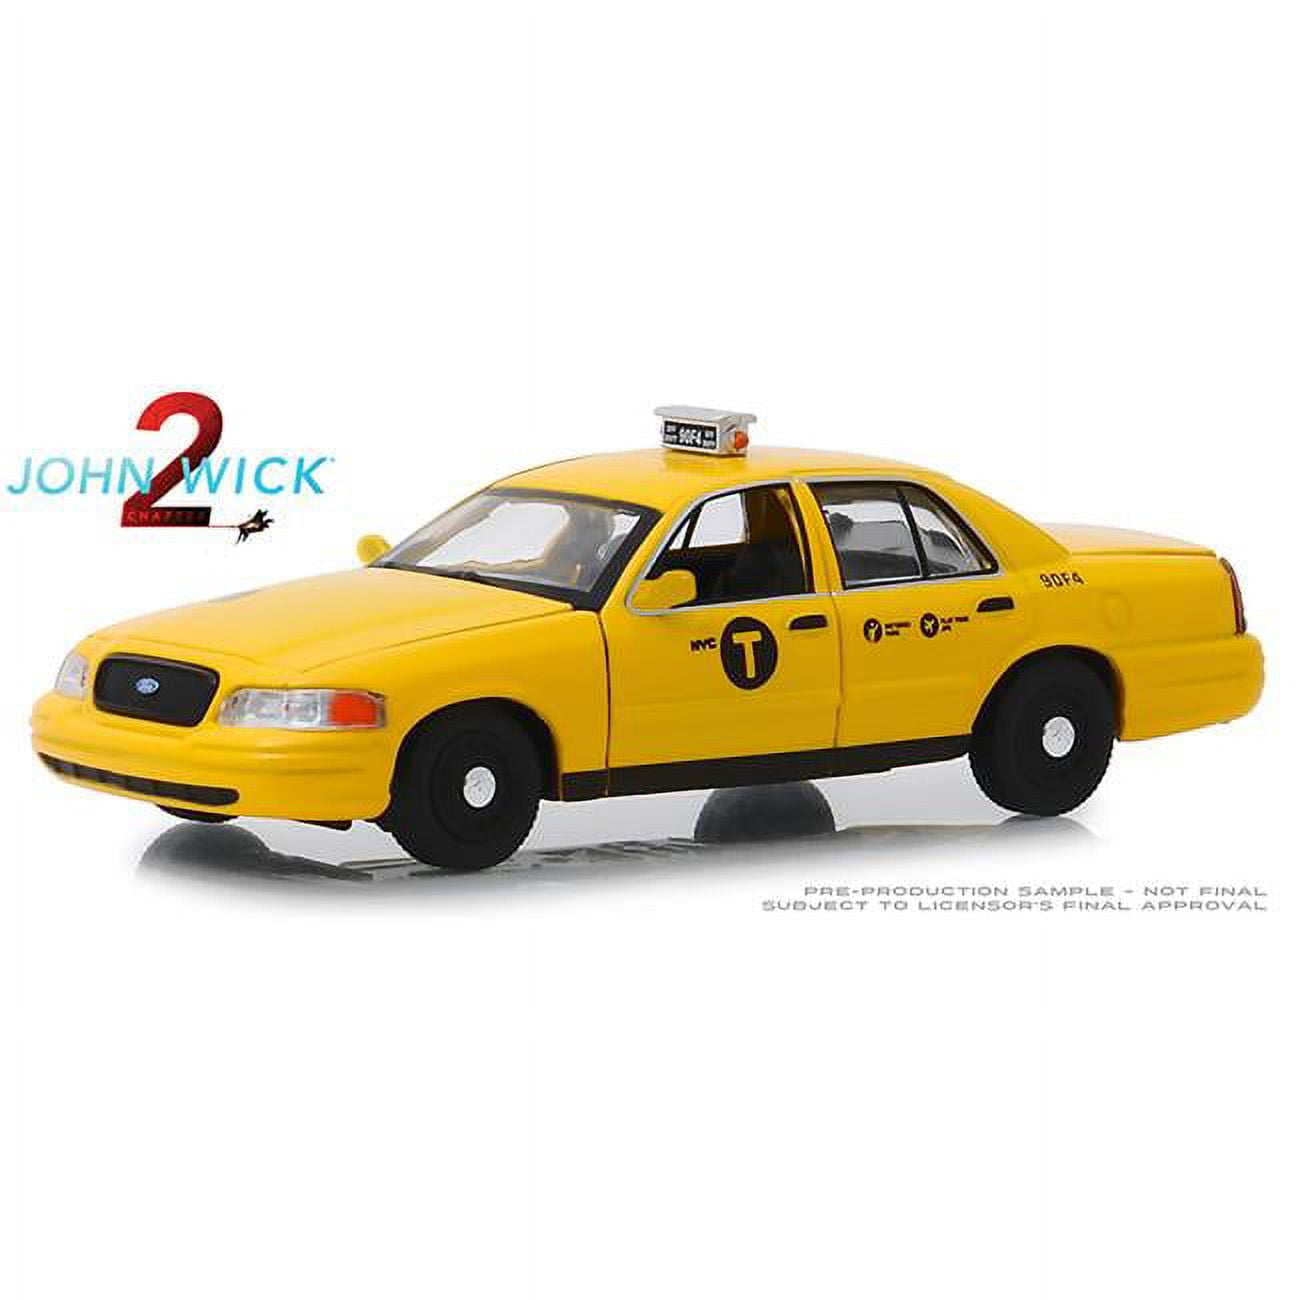 Picture of Greenlight GRE86561 1 by 43 Scale 2008 Ford Crown Victoria Model Taxi